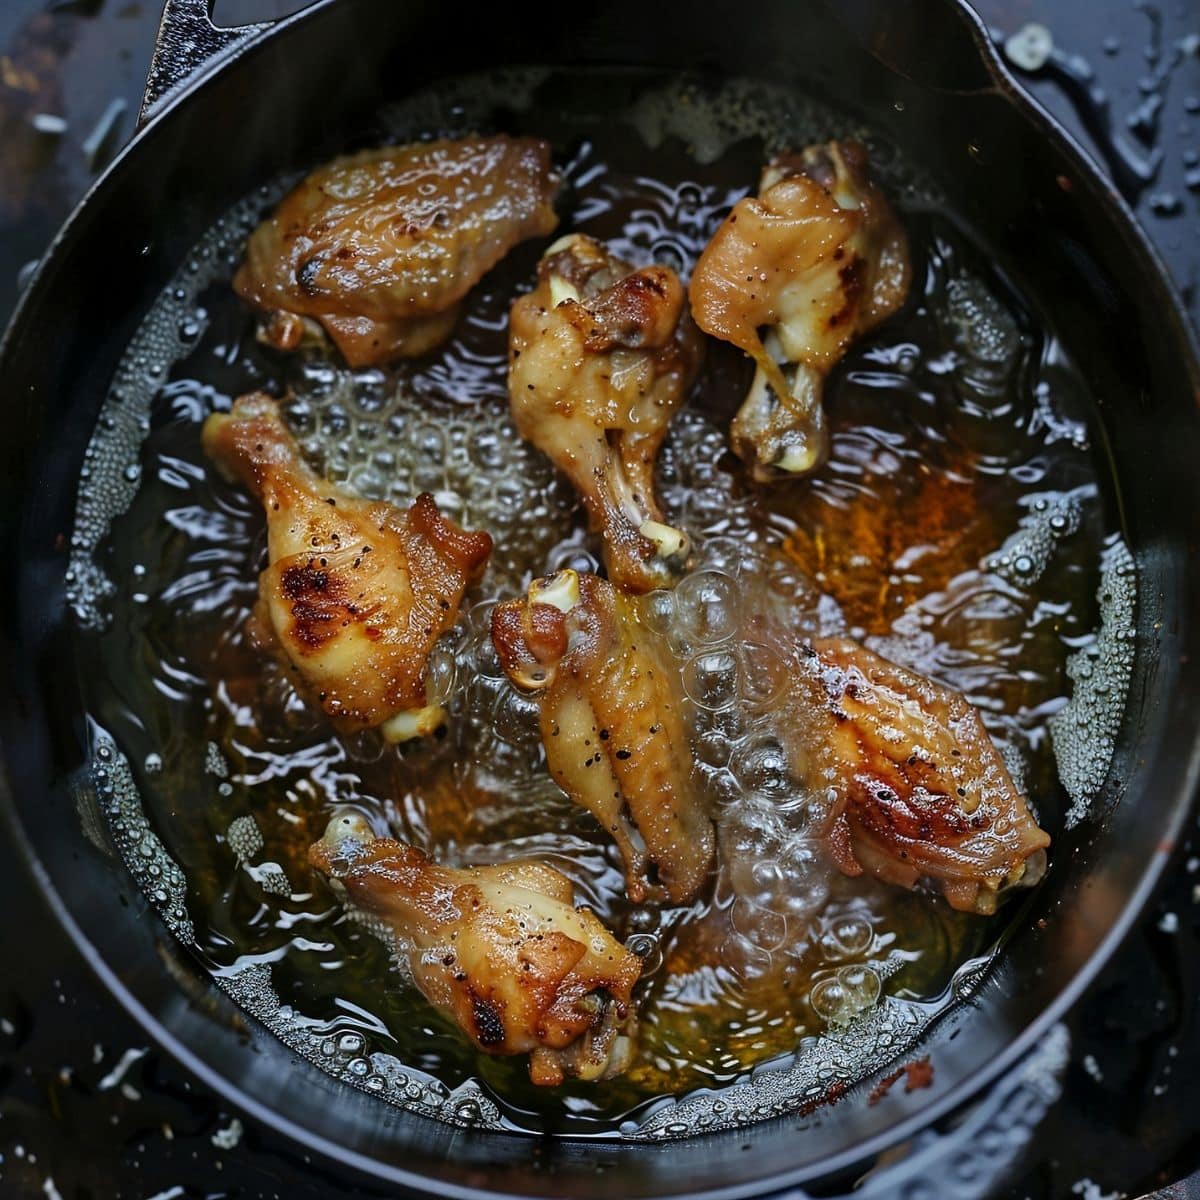 Top View of Chicken Wings Frying in Oil in a Cast Iron Skillet